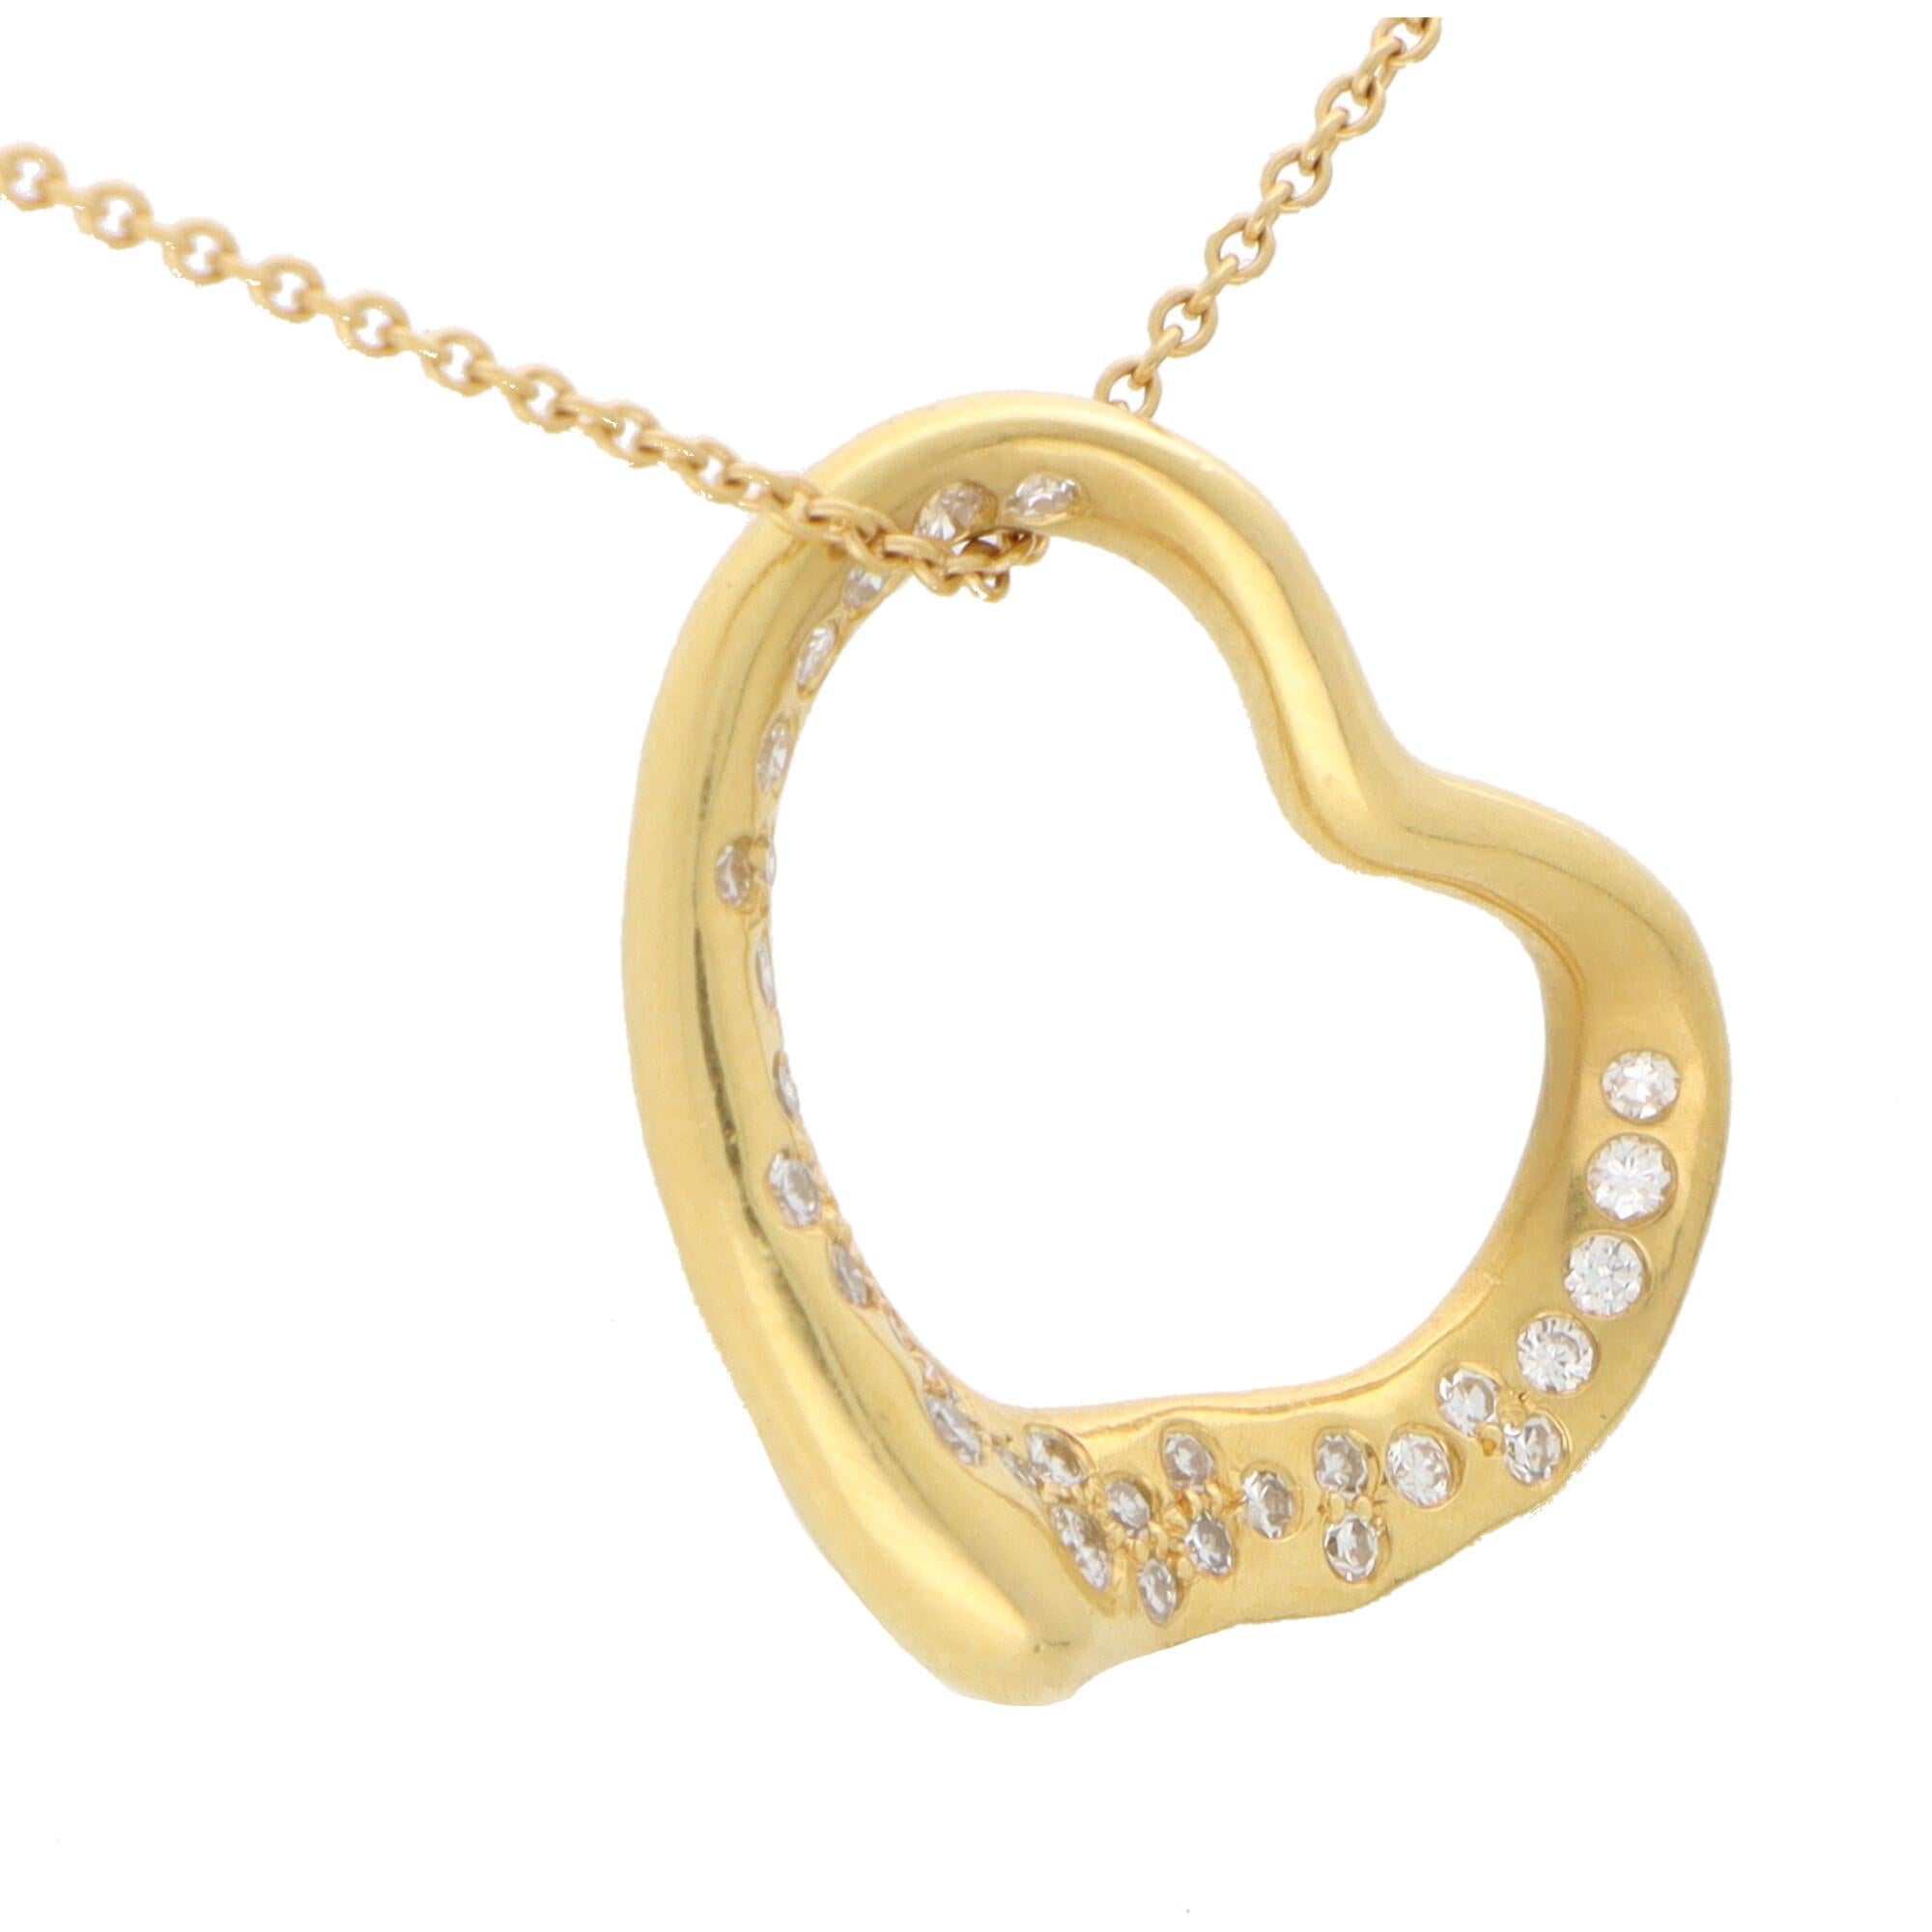 Modern Vintage Elsa Peretti for Tiffany & Co. Diamond Heart Necklace For Sale